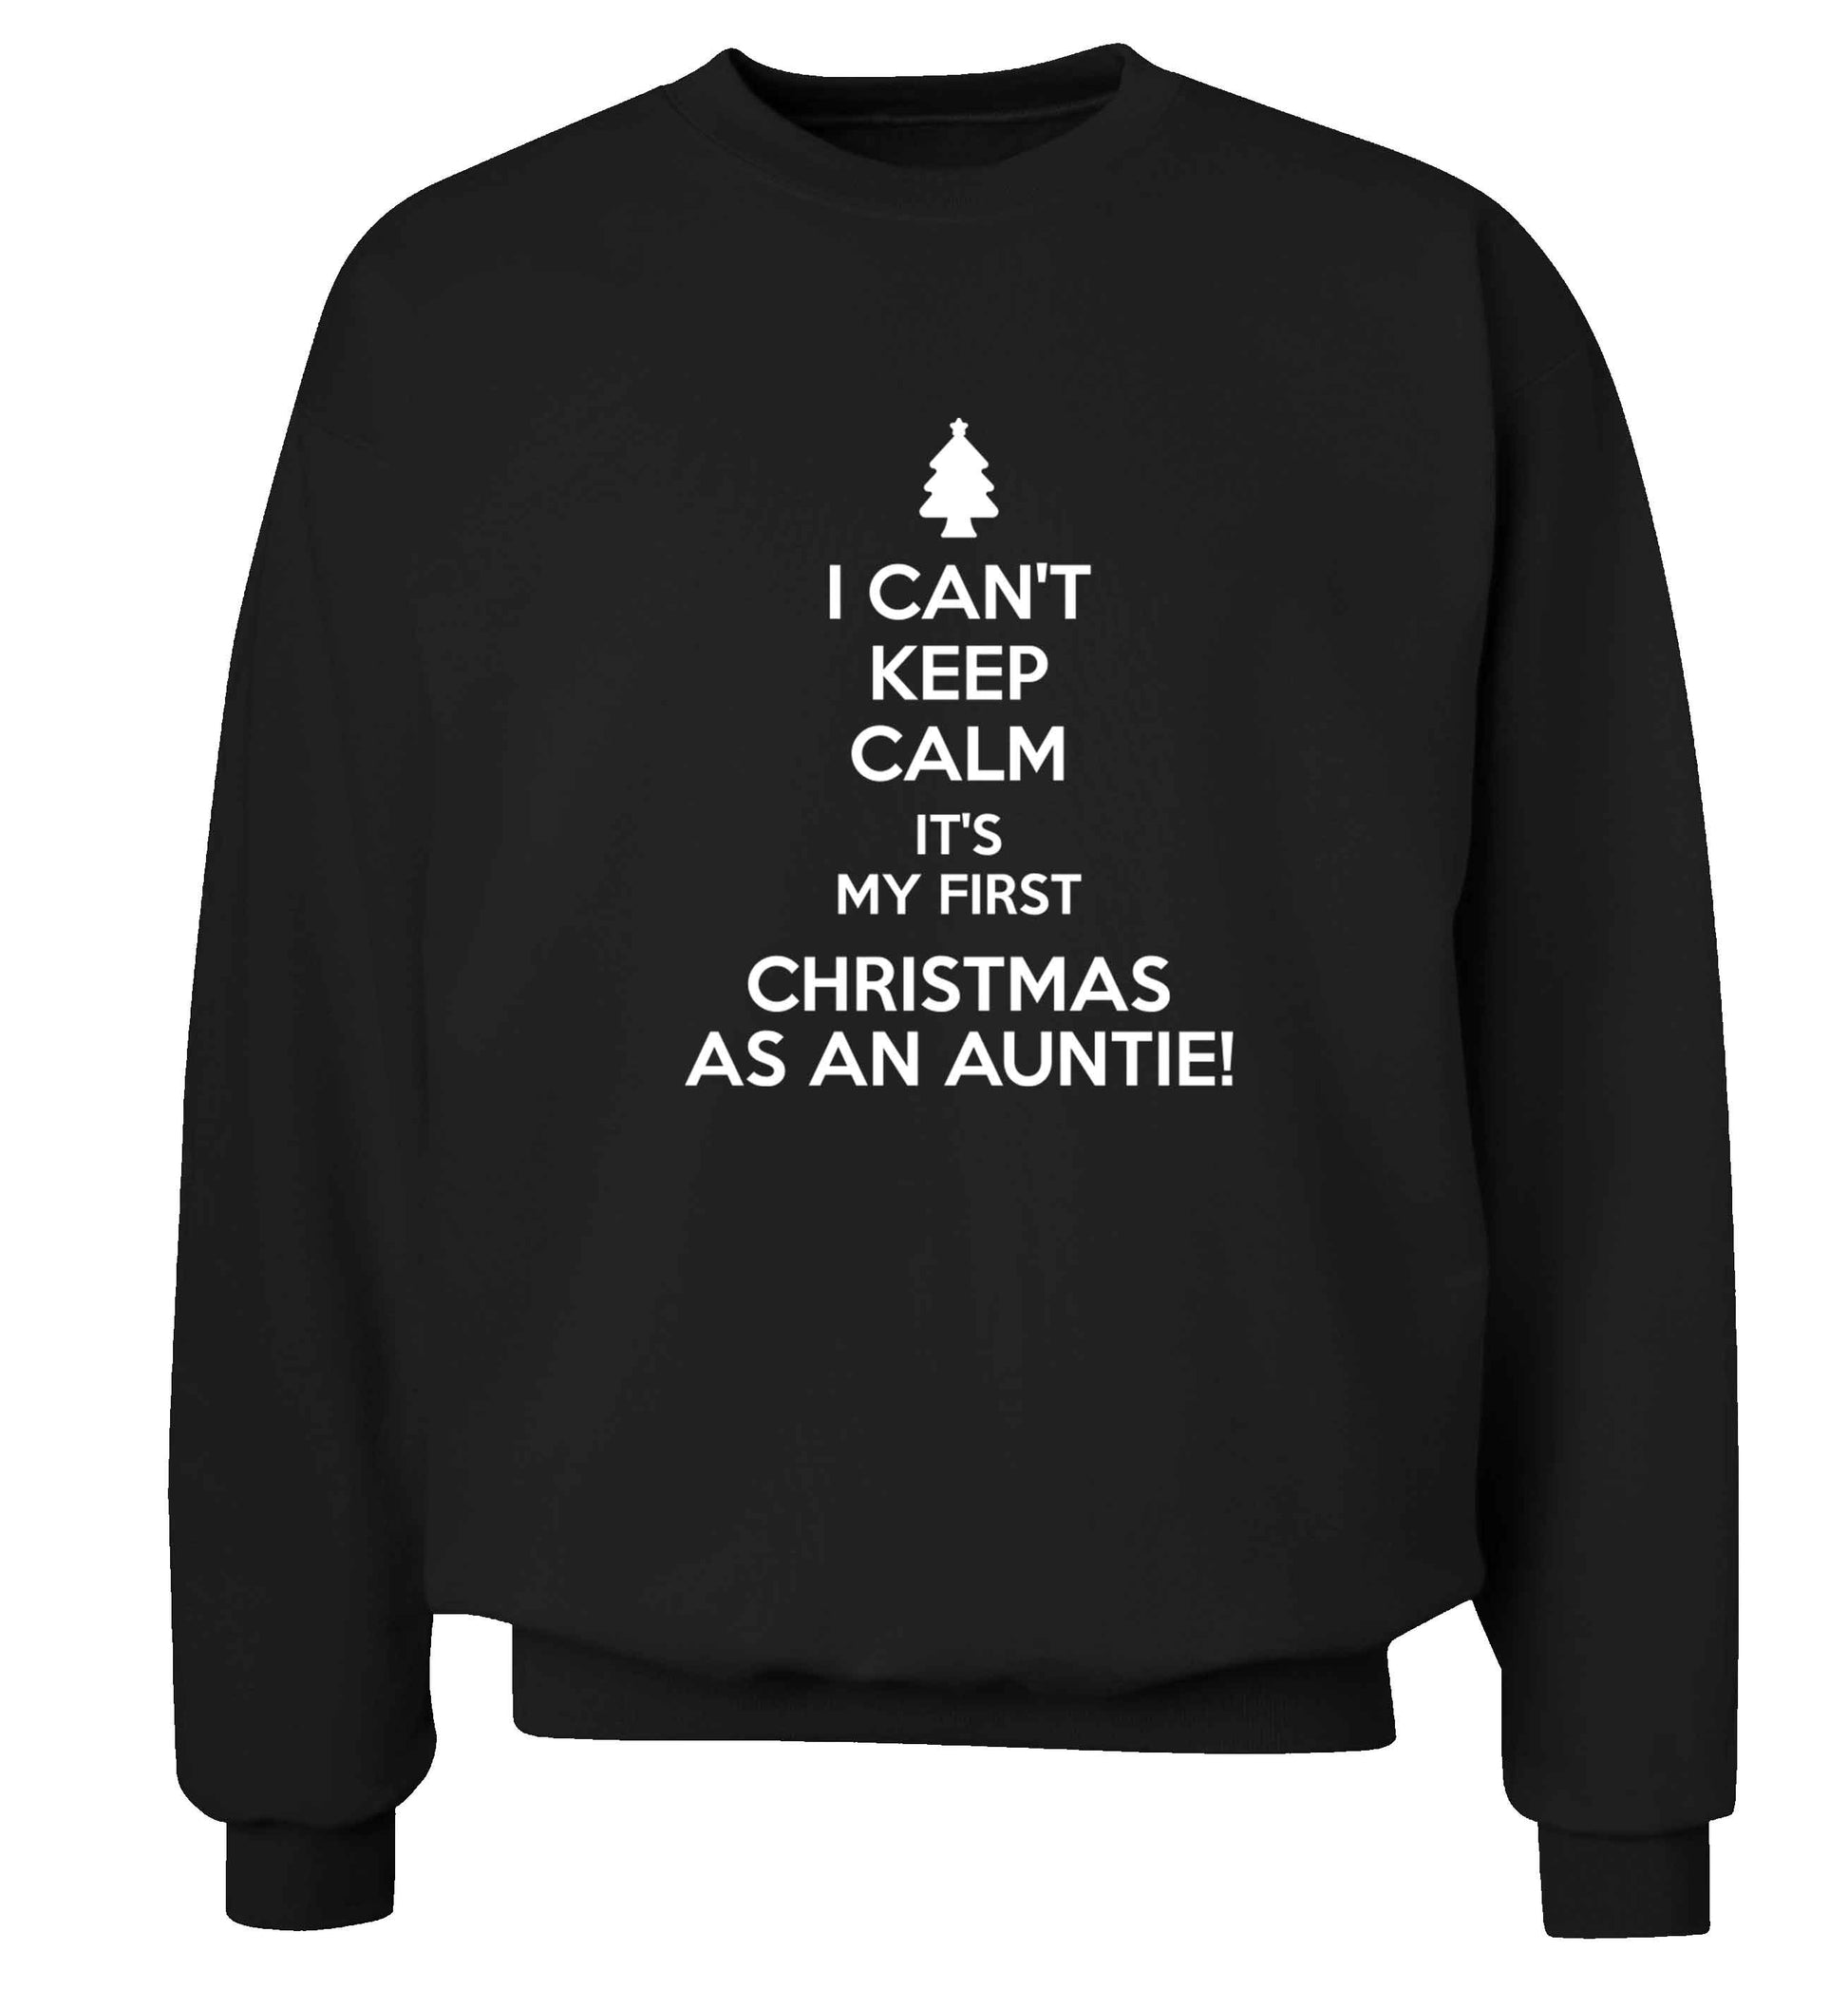 I can't keep calm it's my first Christmas as an auntie! Adult's unisex black Sweater 2XL